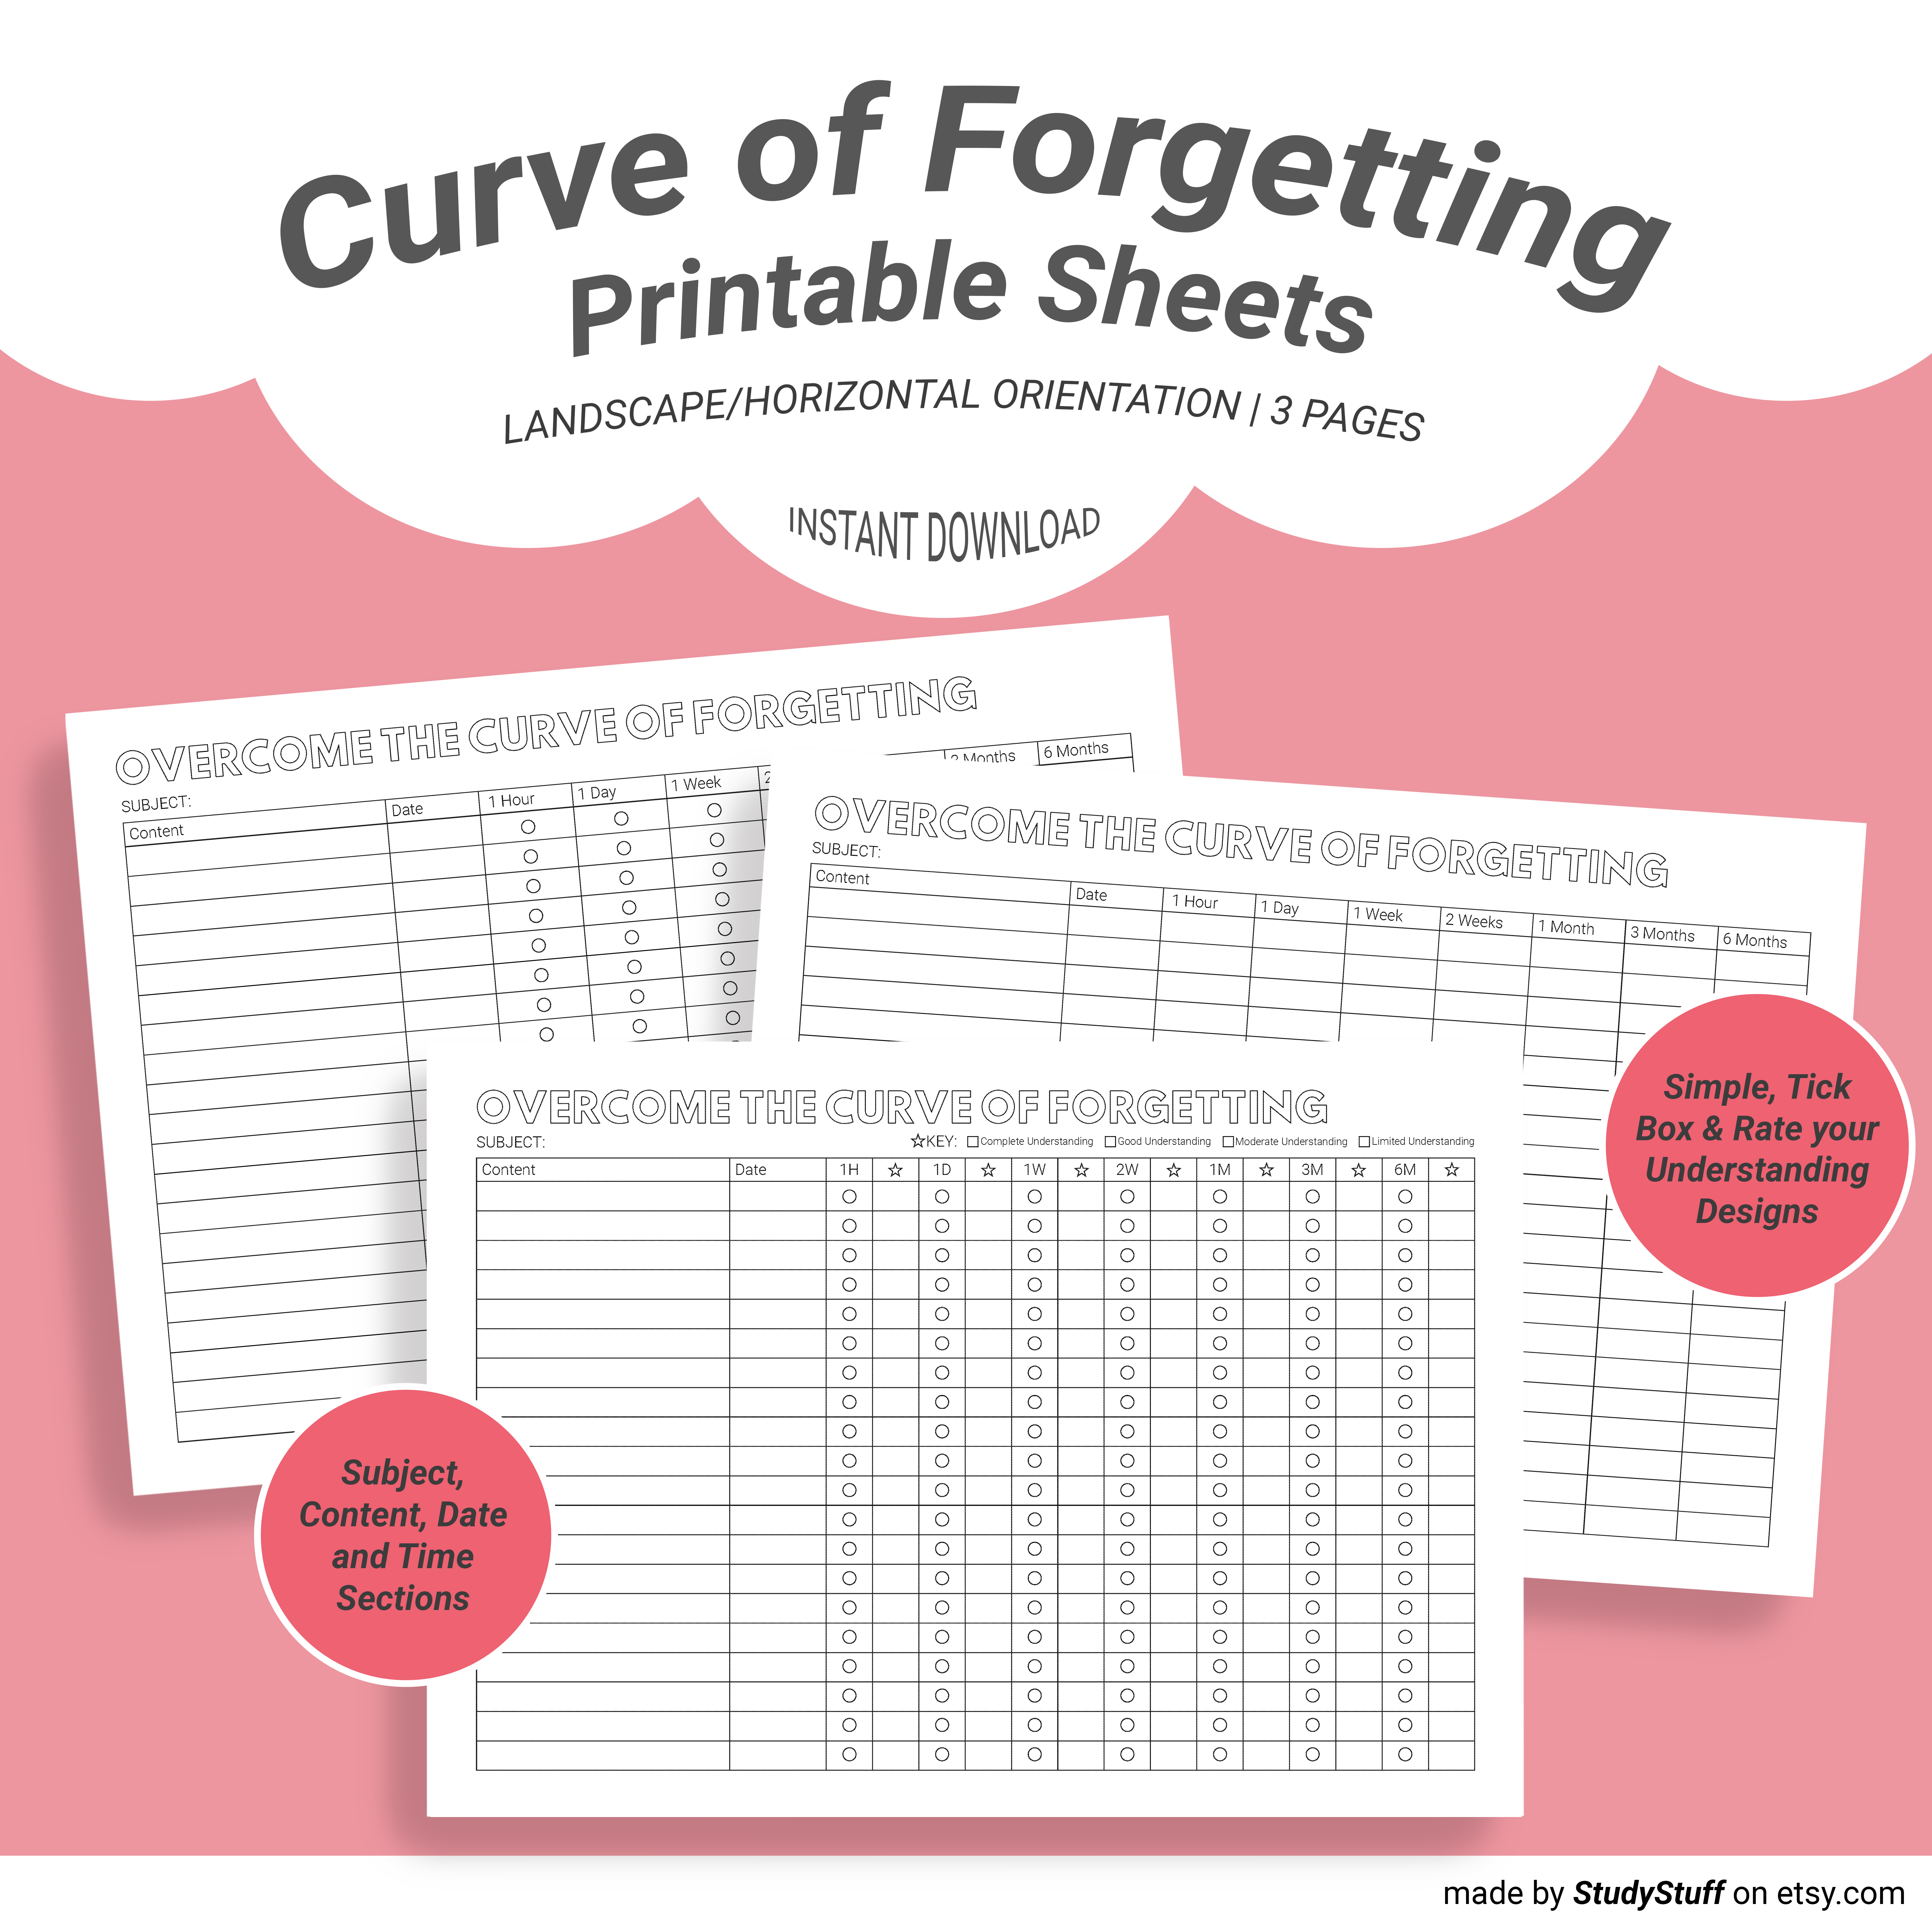 Curve of forgetting printable sheets